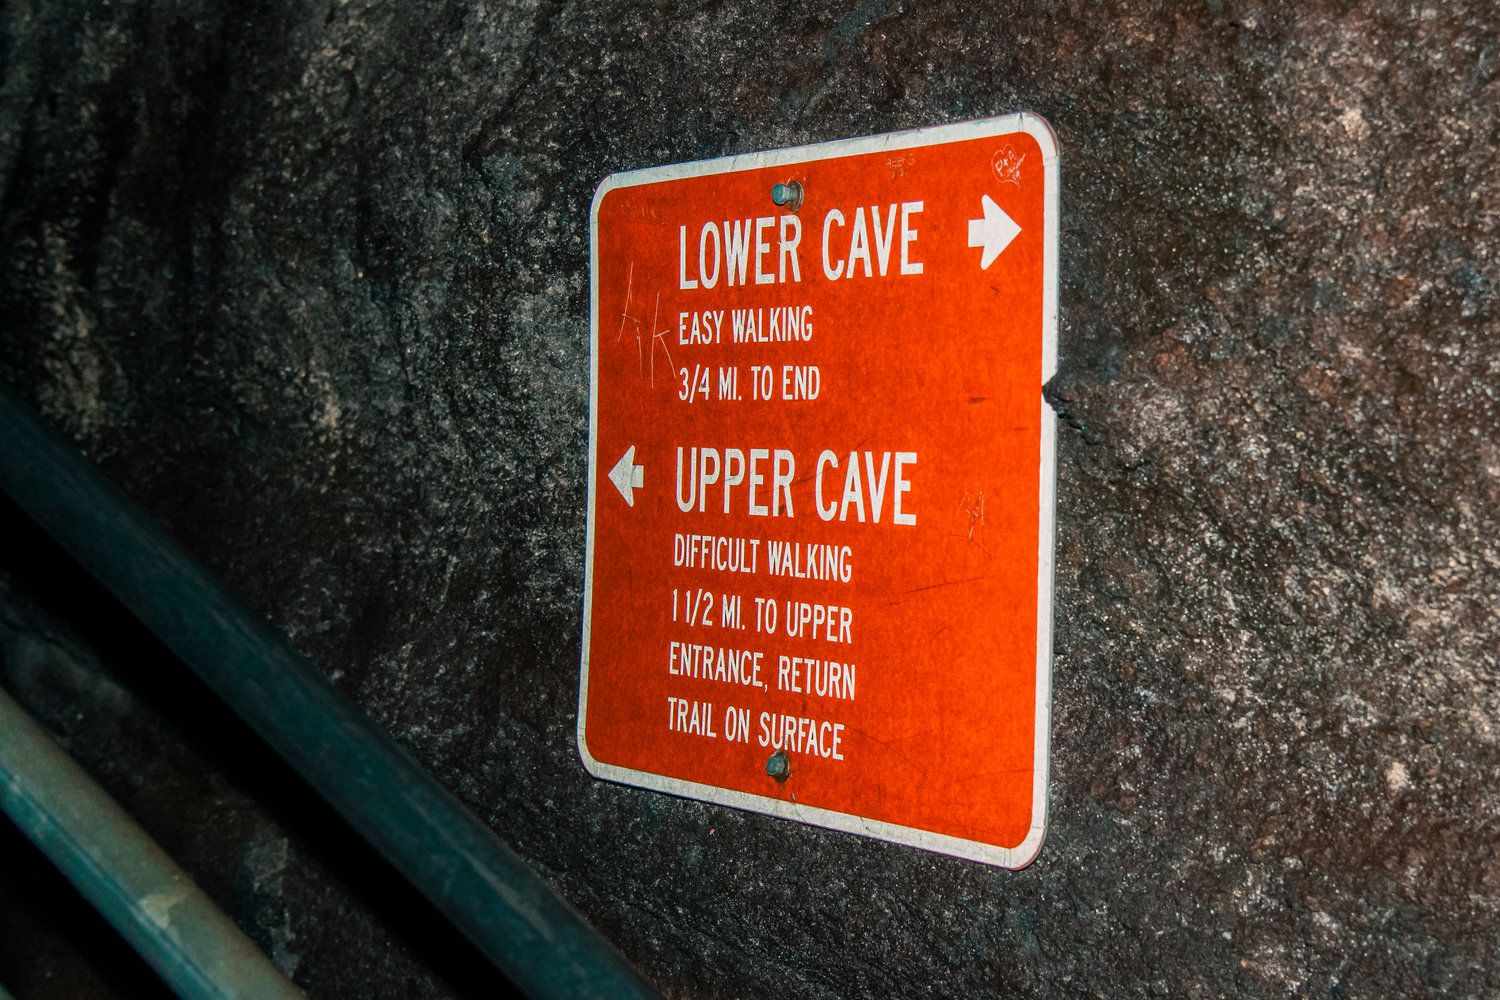 Chronicle reporter Claudia Yaw and photographer Jared Wenzelburger visit the Ape Cave Thursday, May 20, 2021.